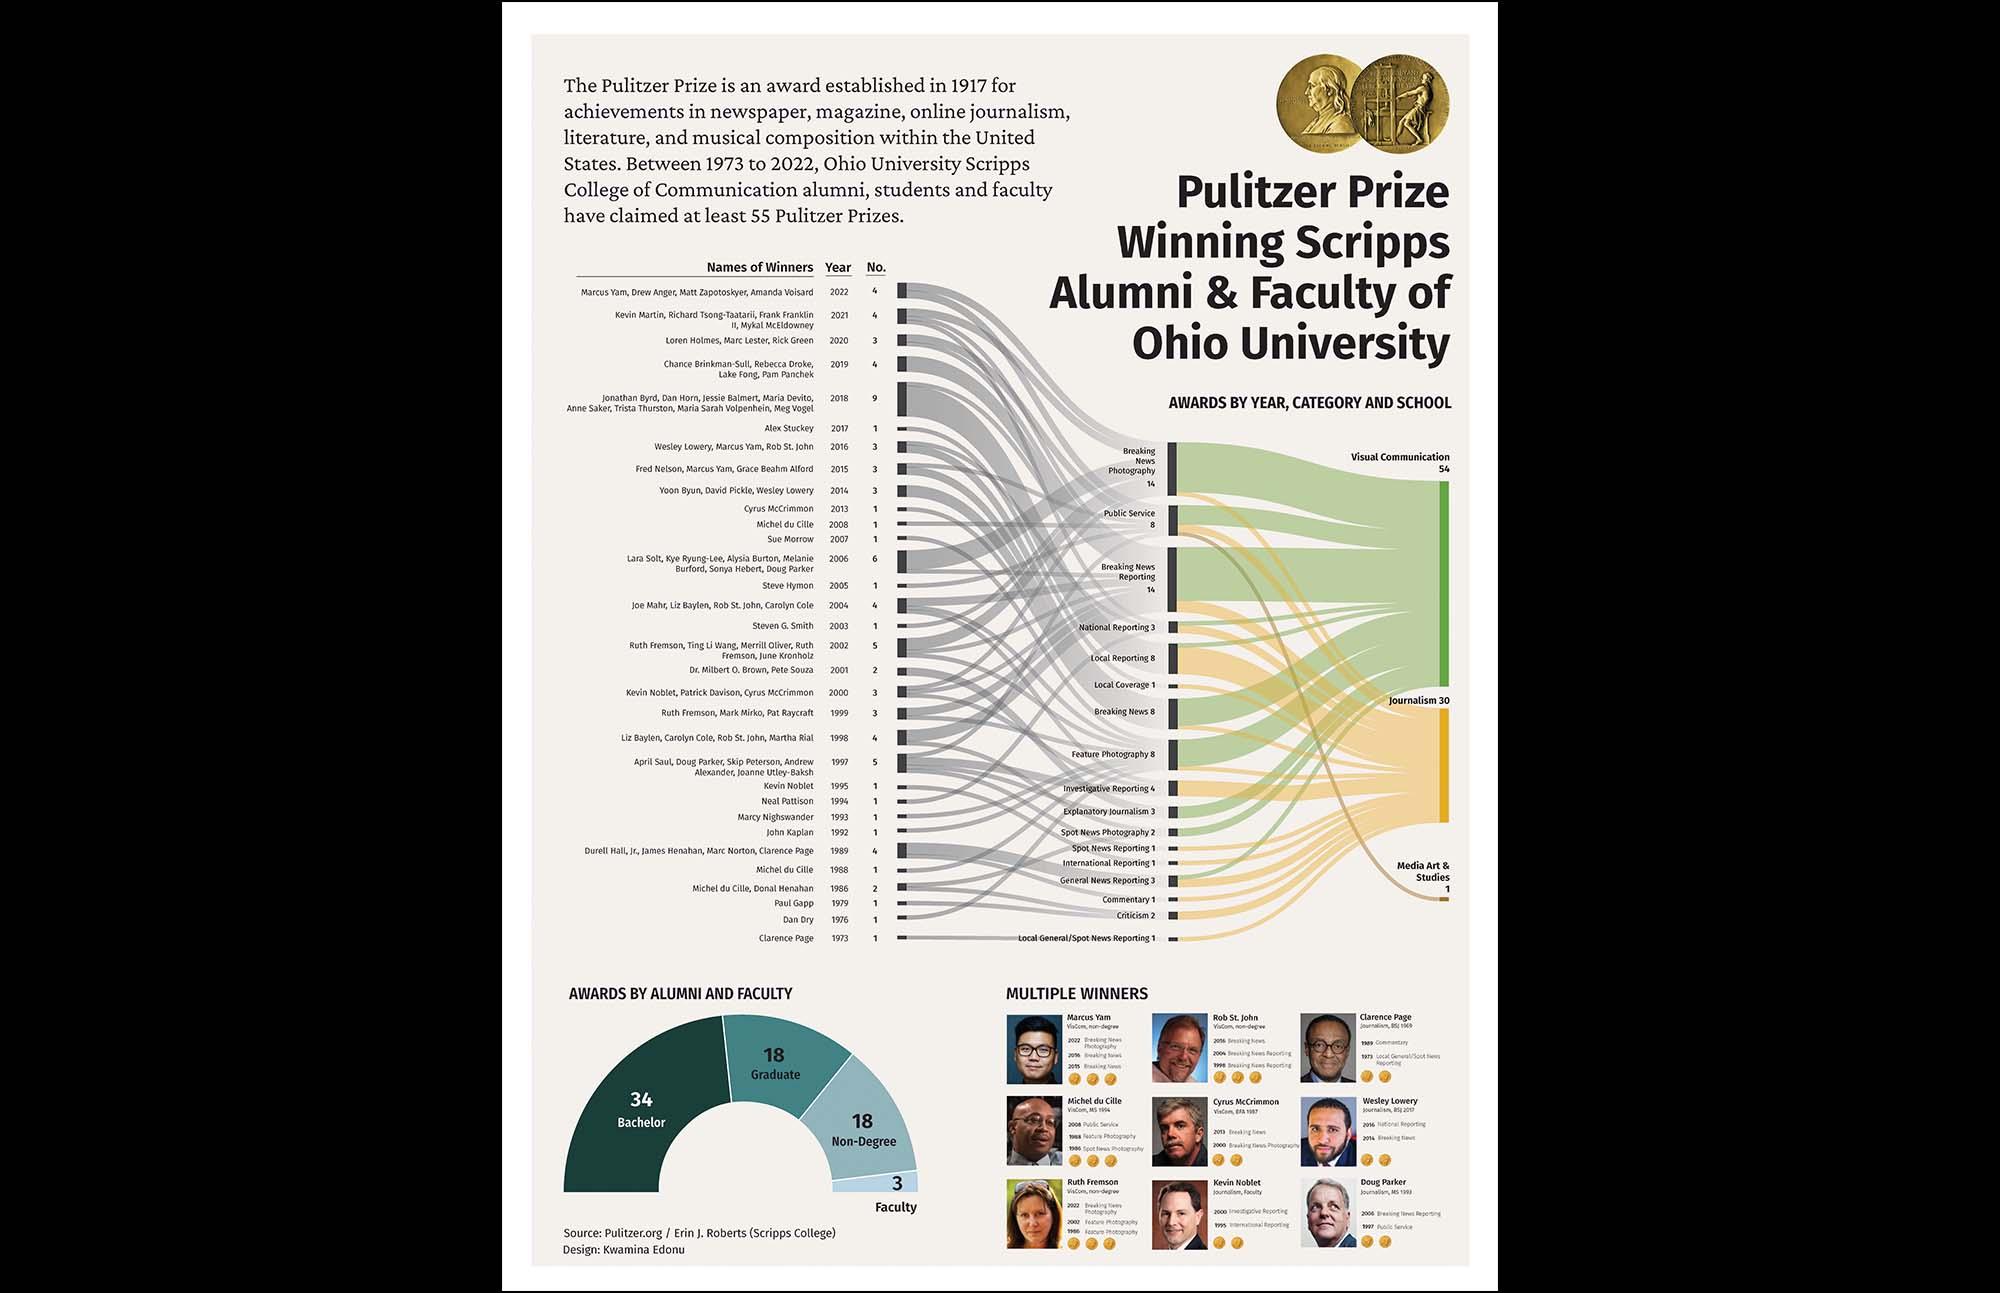 Infographic illustrating the 55 how the Pulitzer Prize winning alumni & faculty of Ohio University's Scripps College of Communication break out by year, category and school.